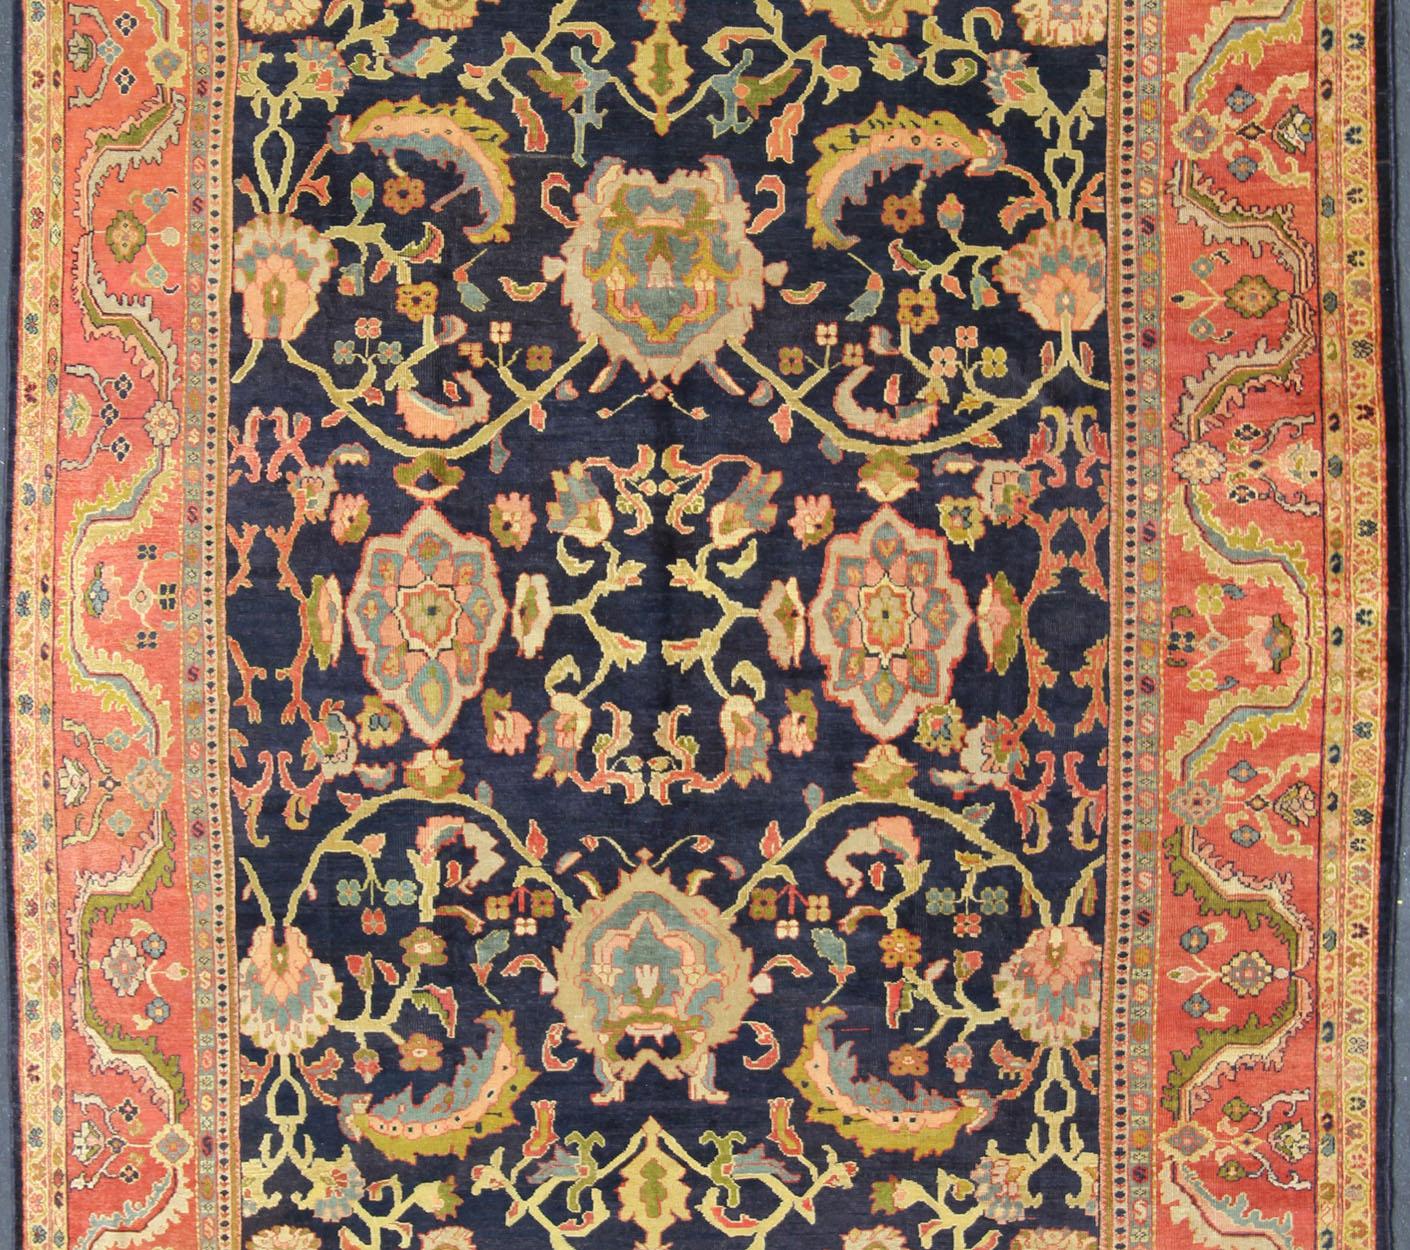  Antique Persian Sultanabad Carpet in Navy Blue Background and Rose Red Border  In Good Condition For Sale In Atlanta, GA